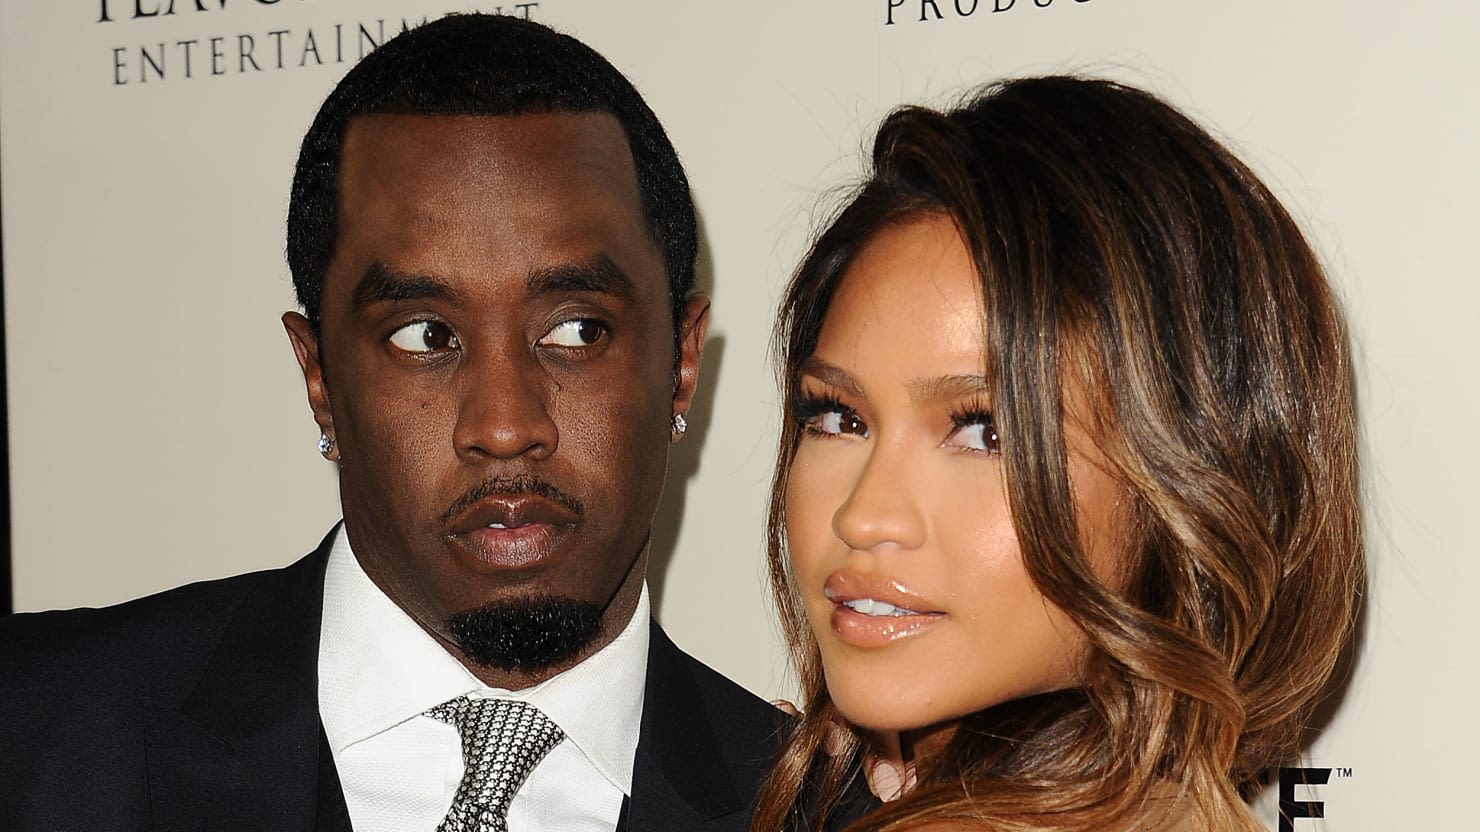 Diddy Defenders Can’t Unsee Disturbing Assault Video